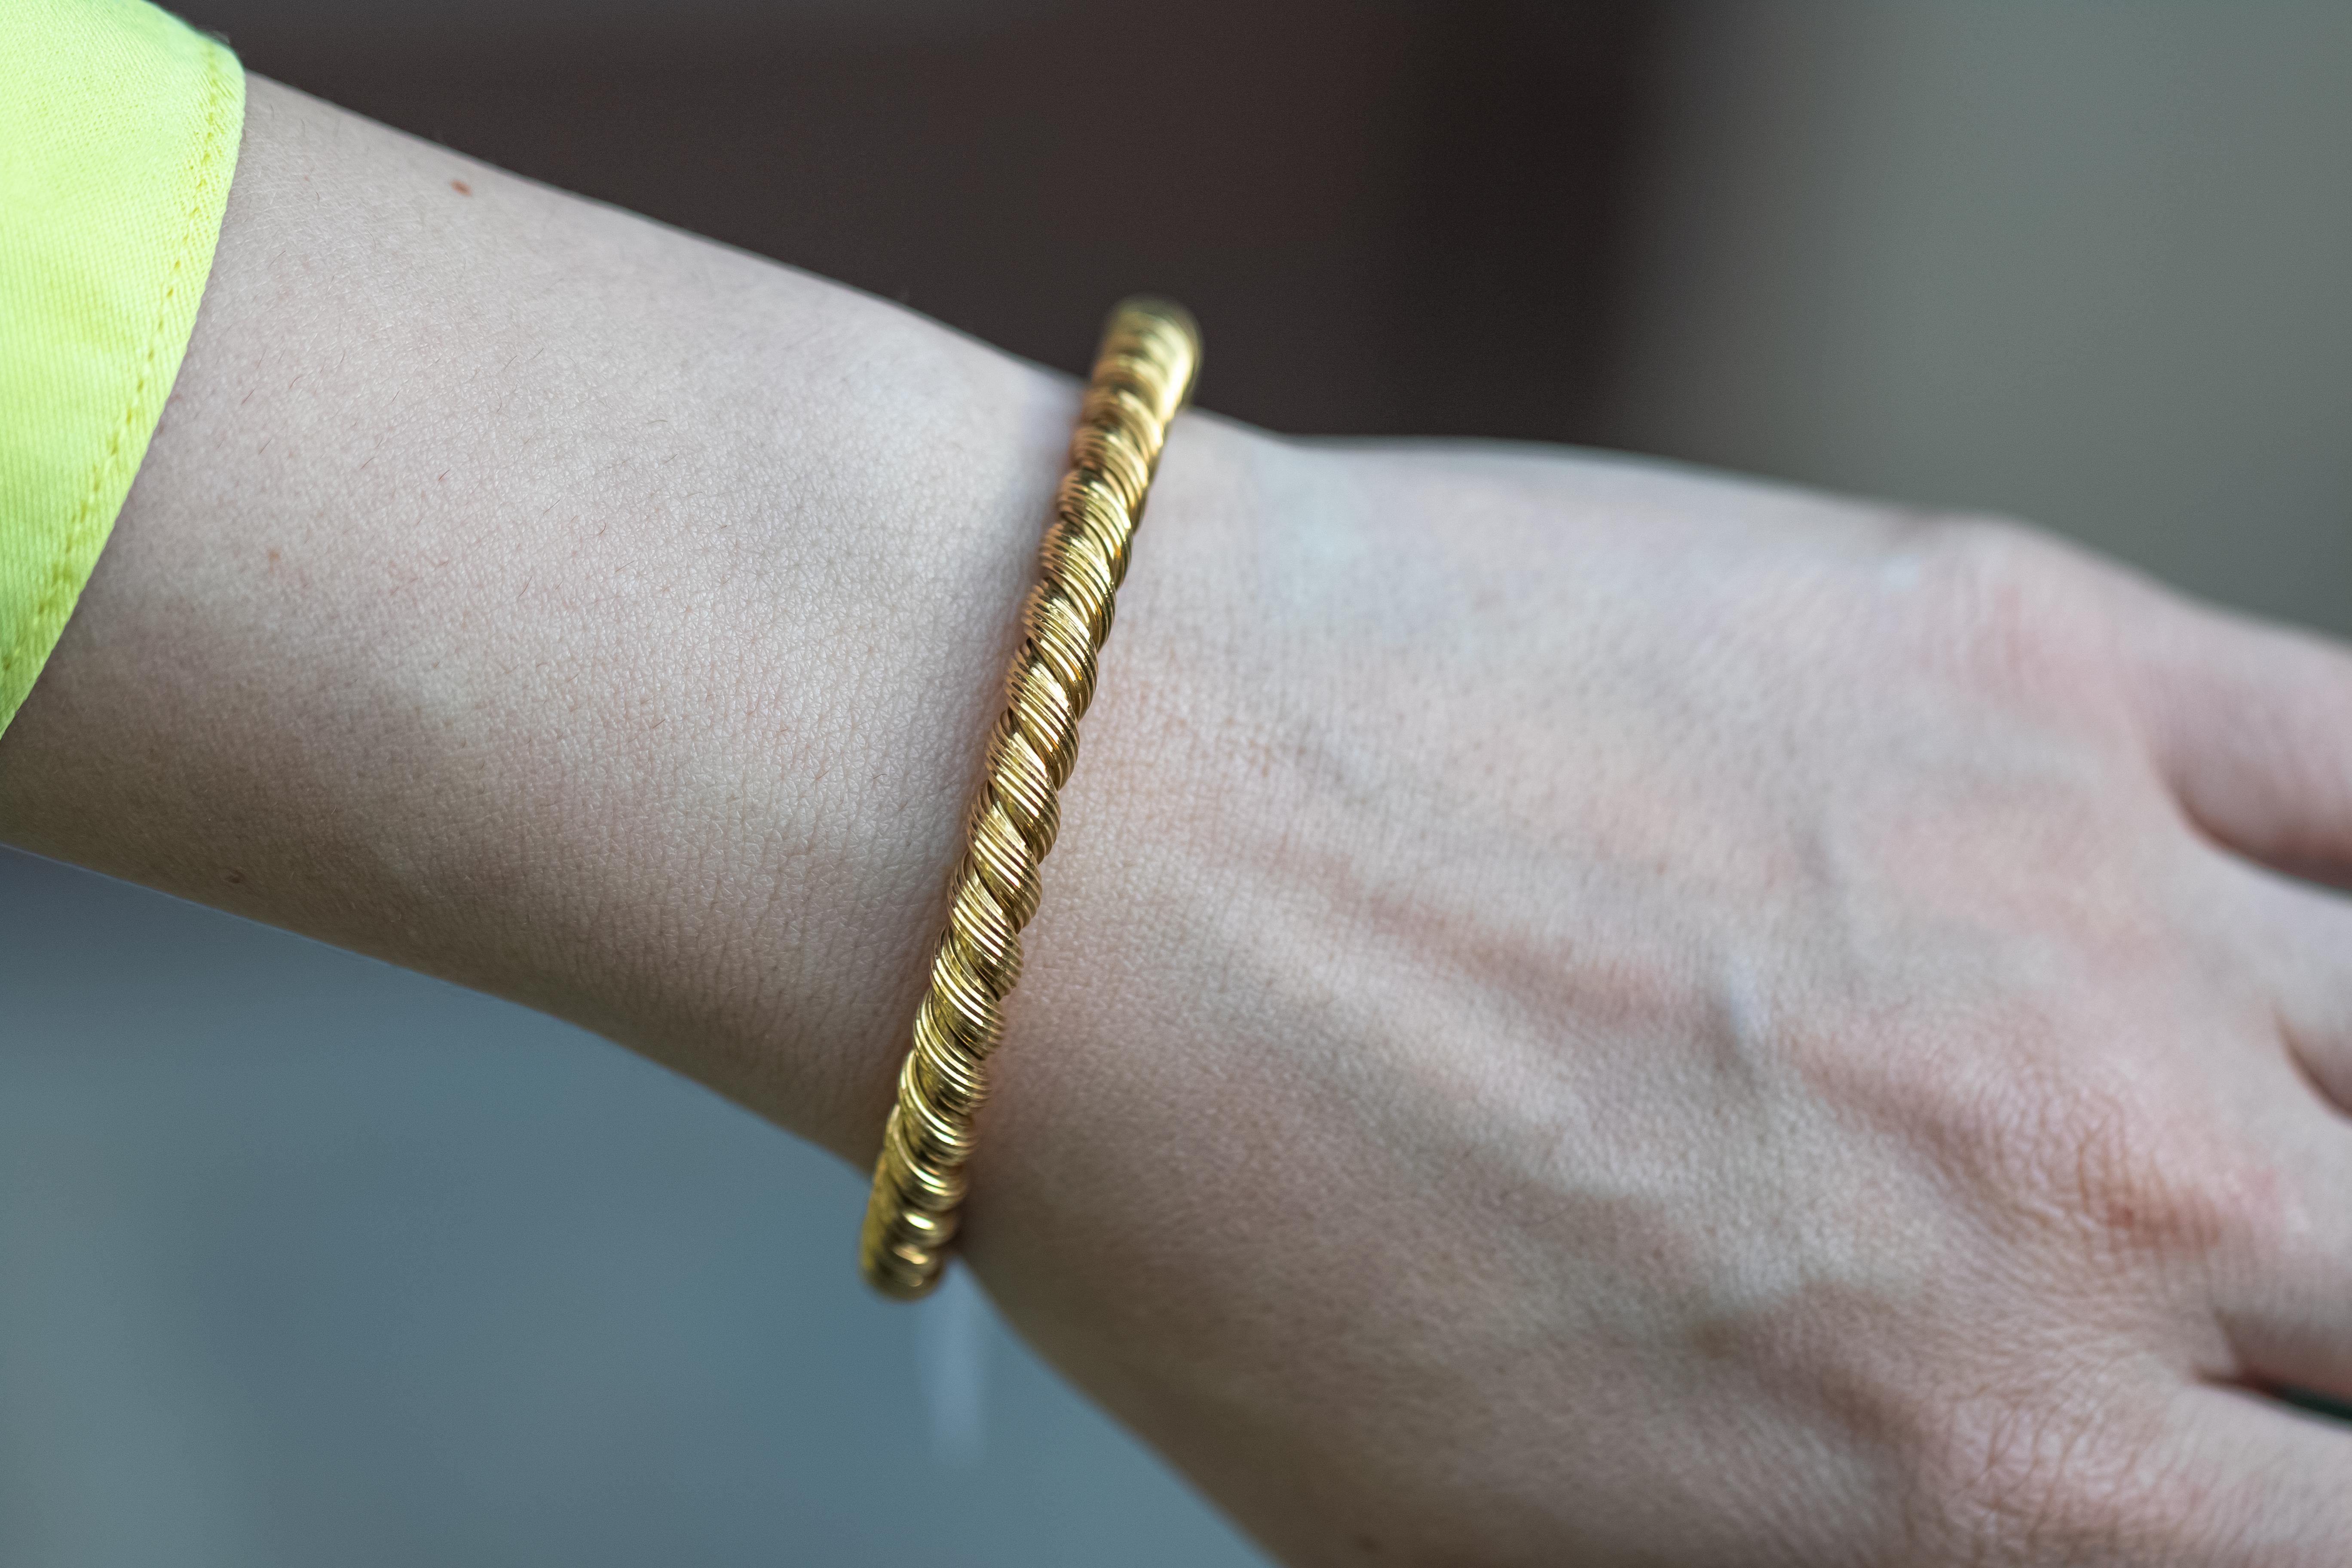 A fabulous Van Cleef & Arpels hand made bangle bracelet featuring a braided design in glimmering 18k yellow gold.
